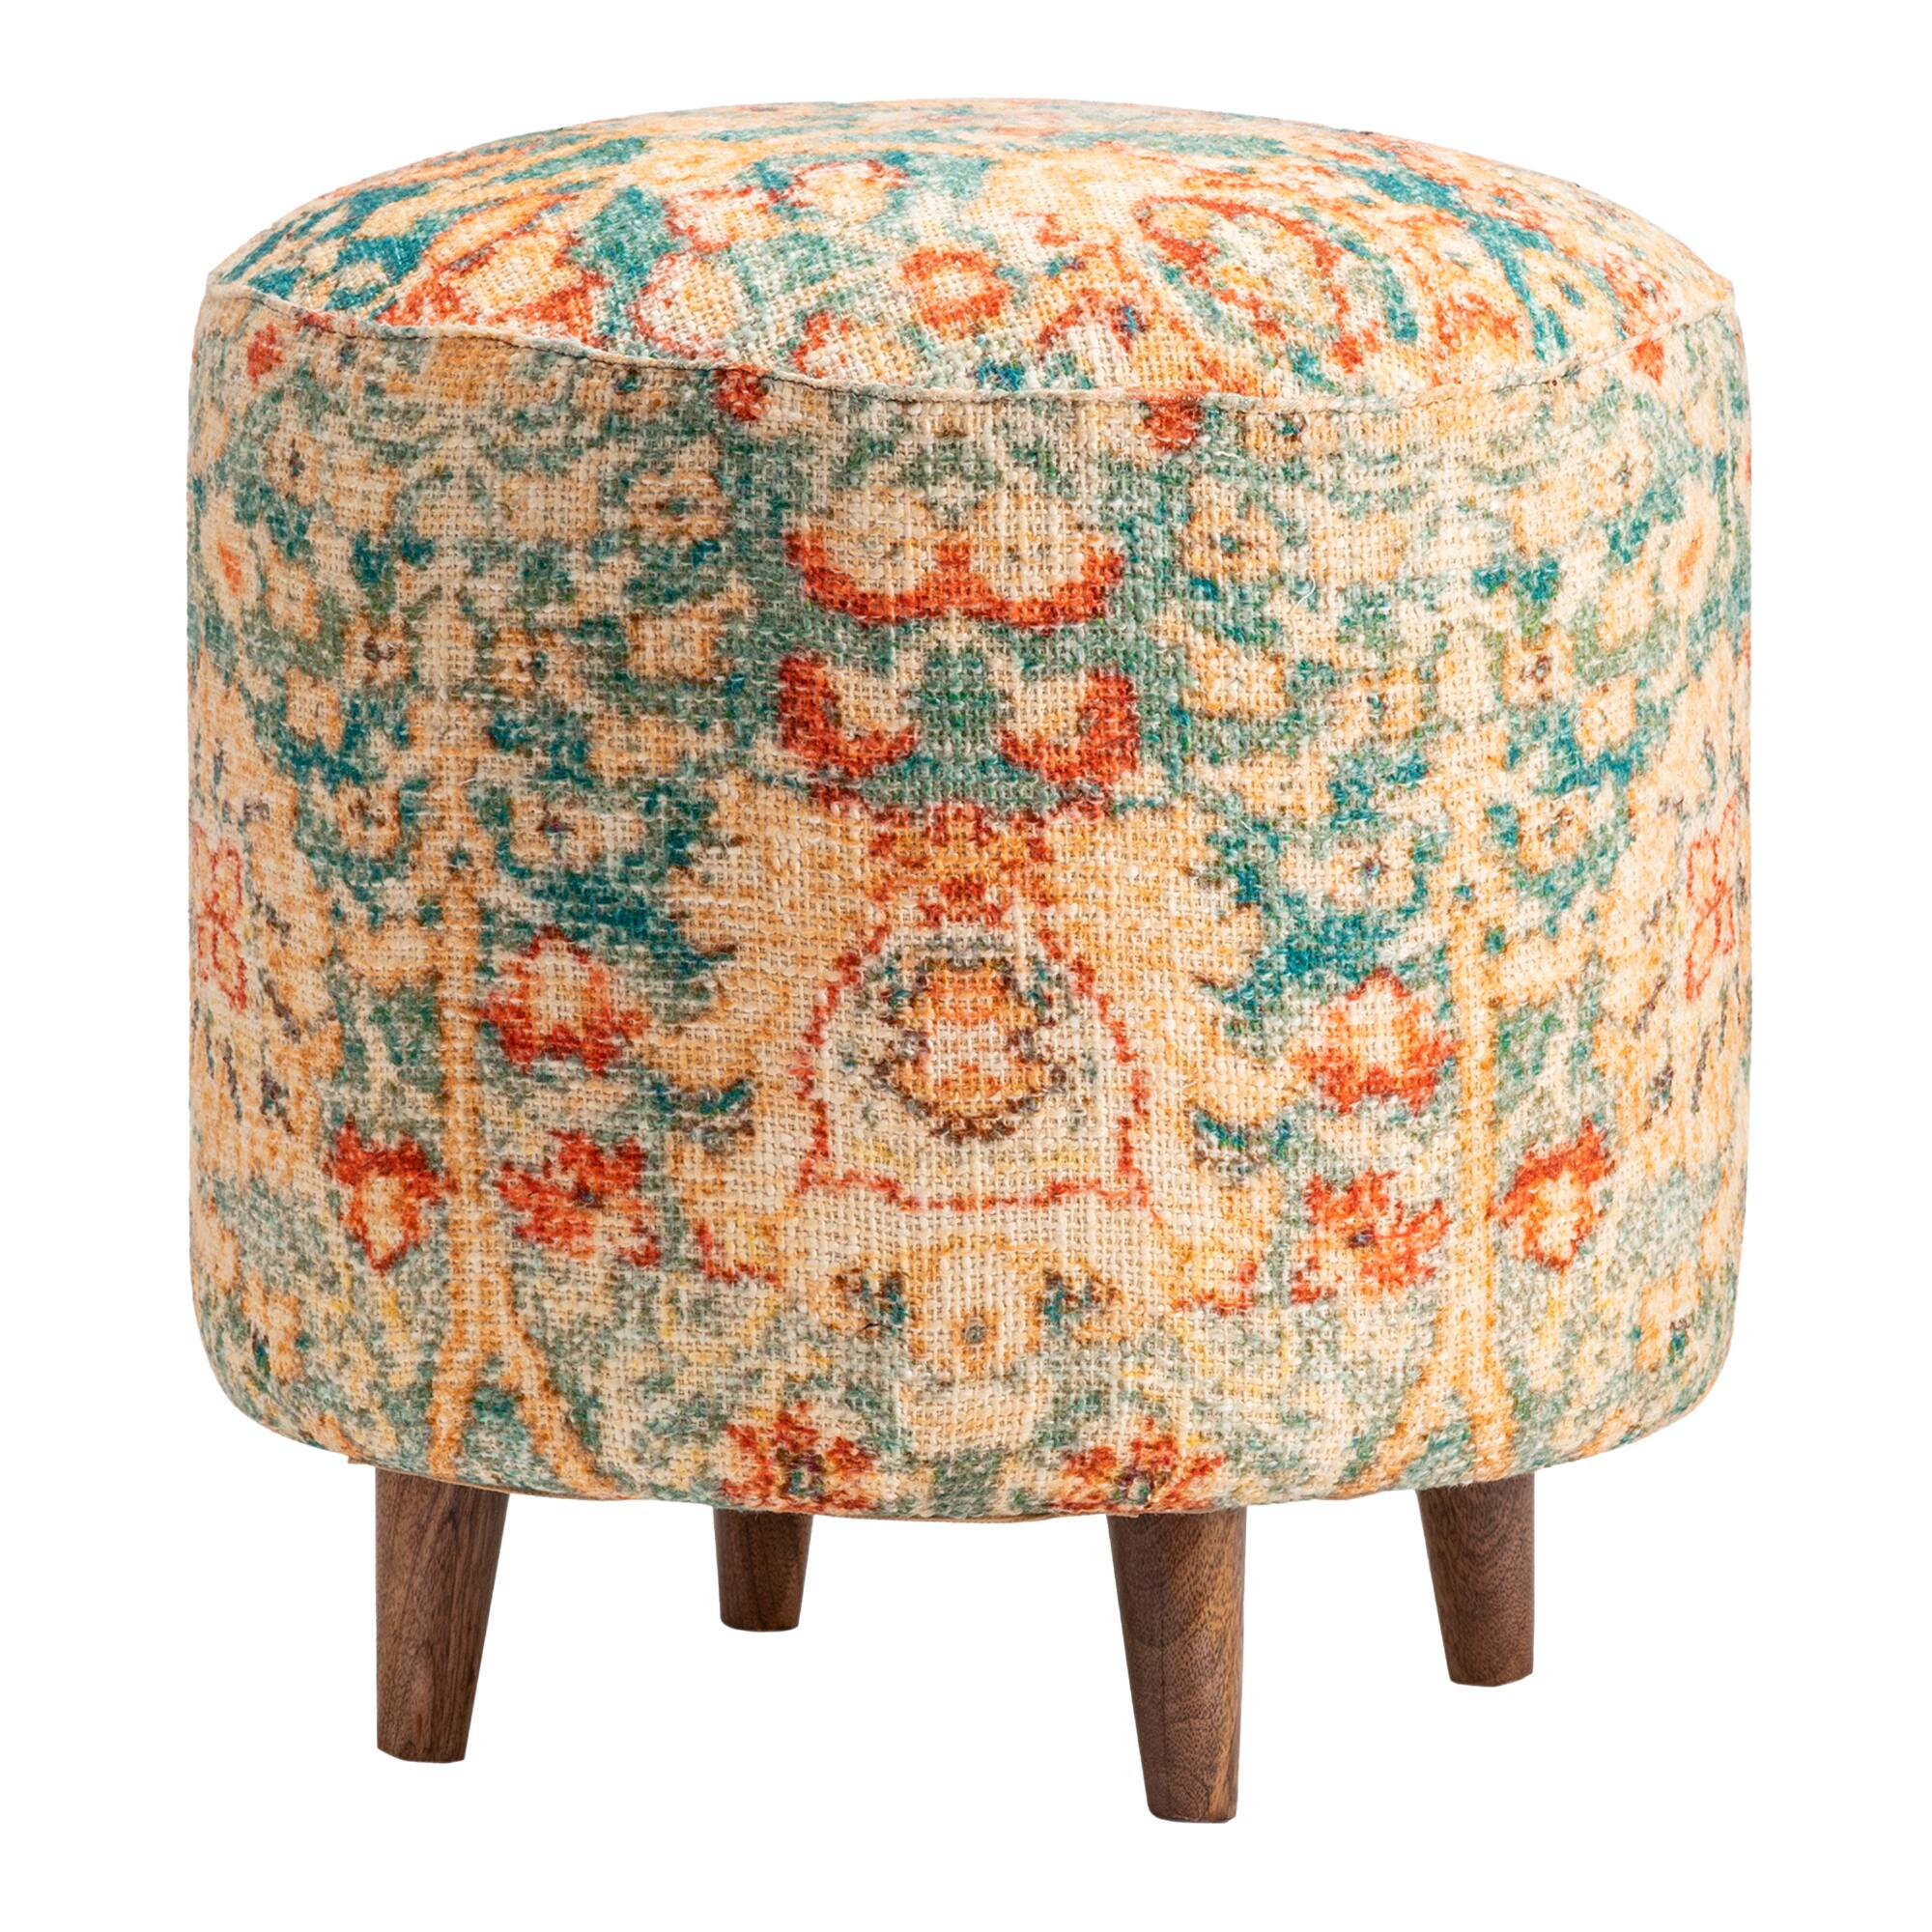 Round Multicolor Harlon Upholstered Ottoman by World Market